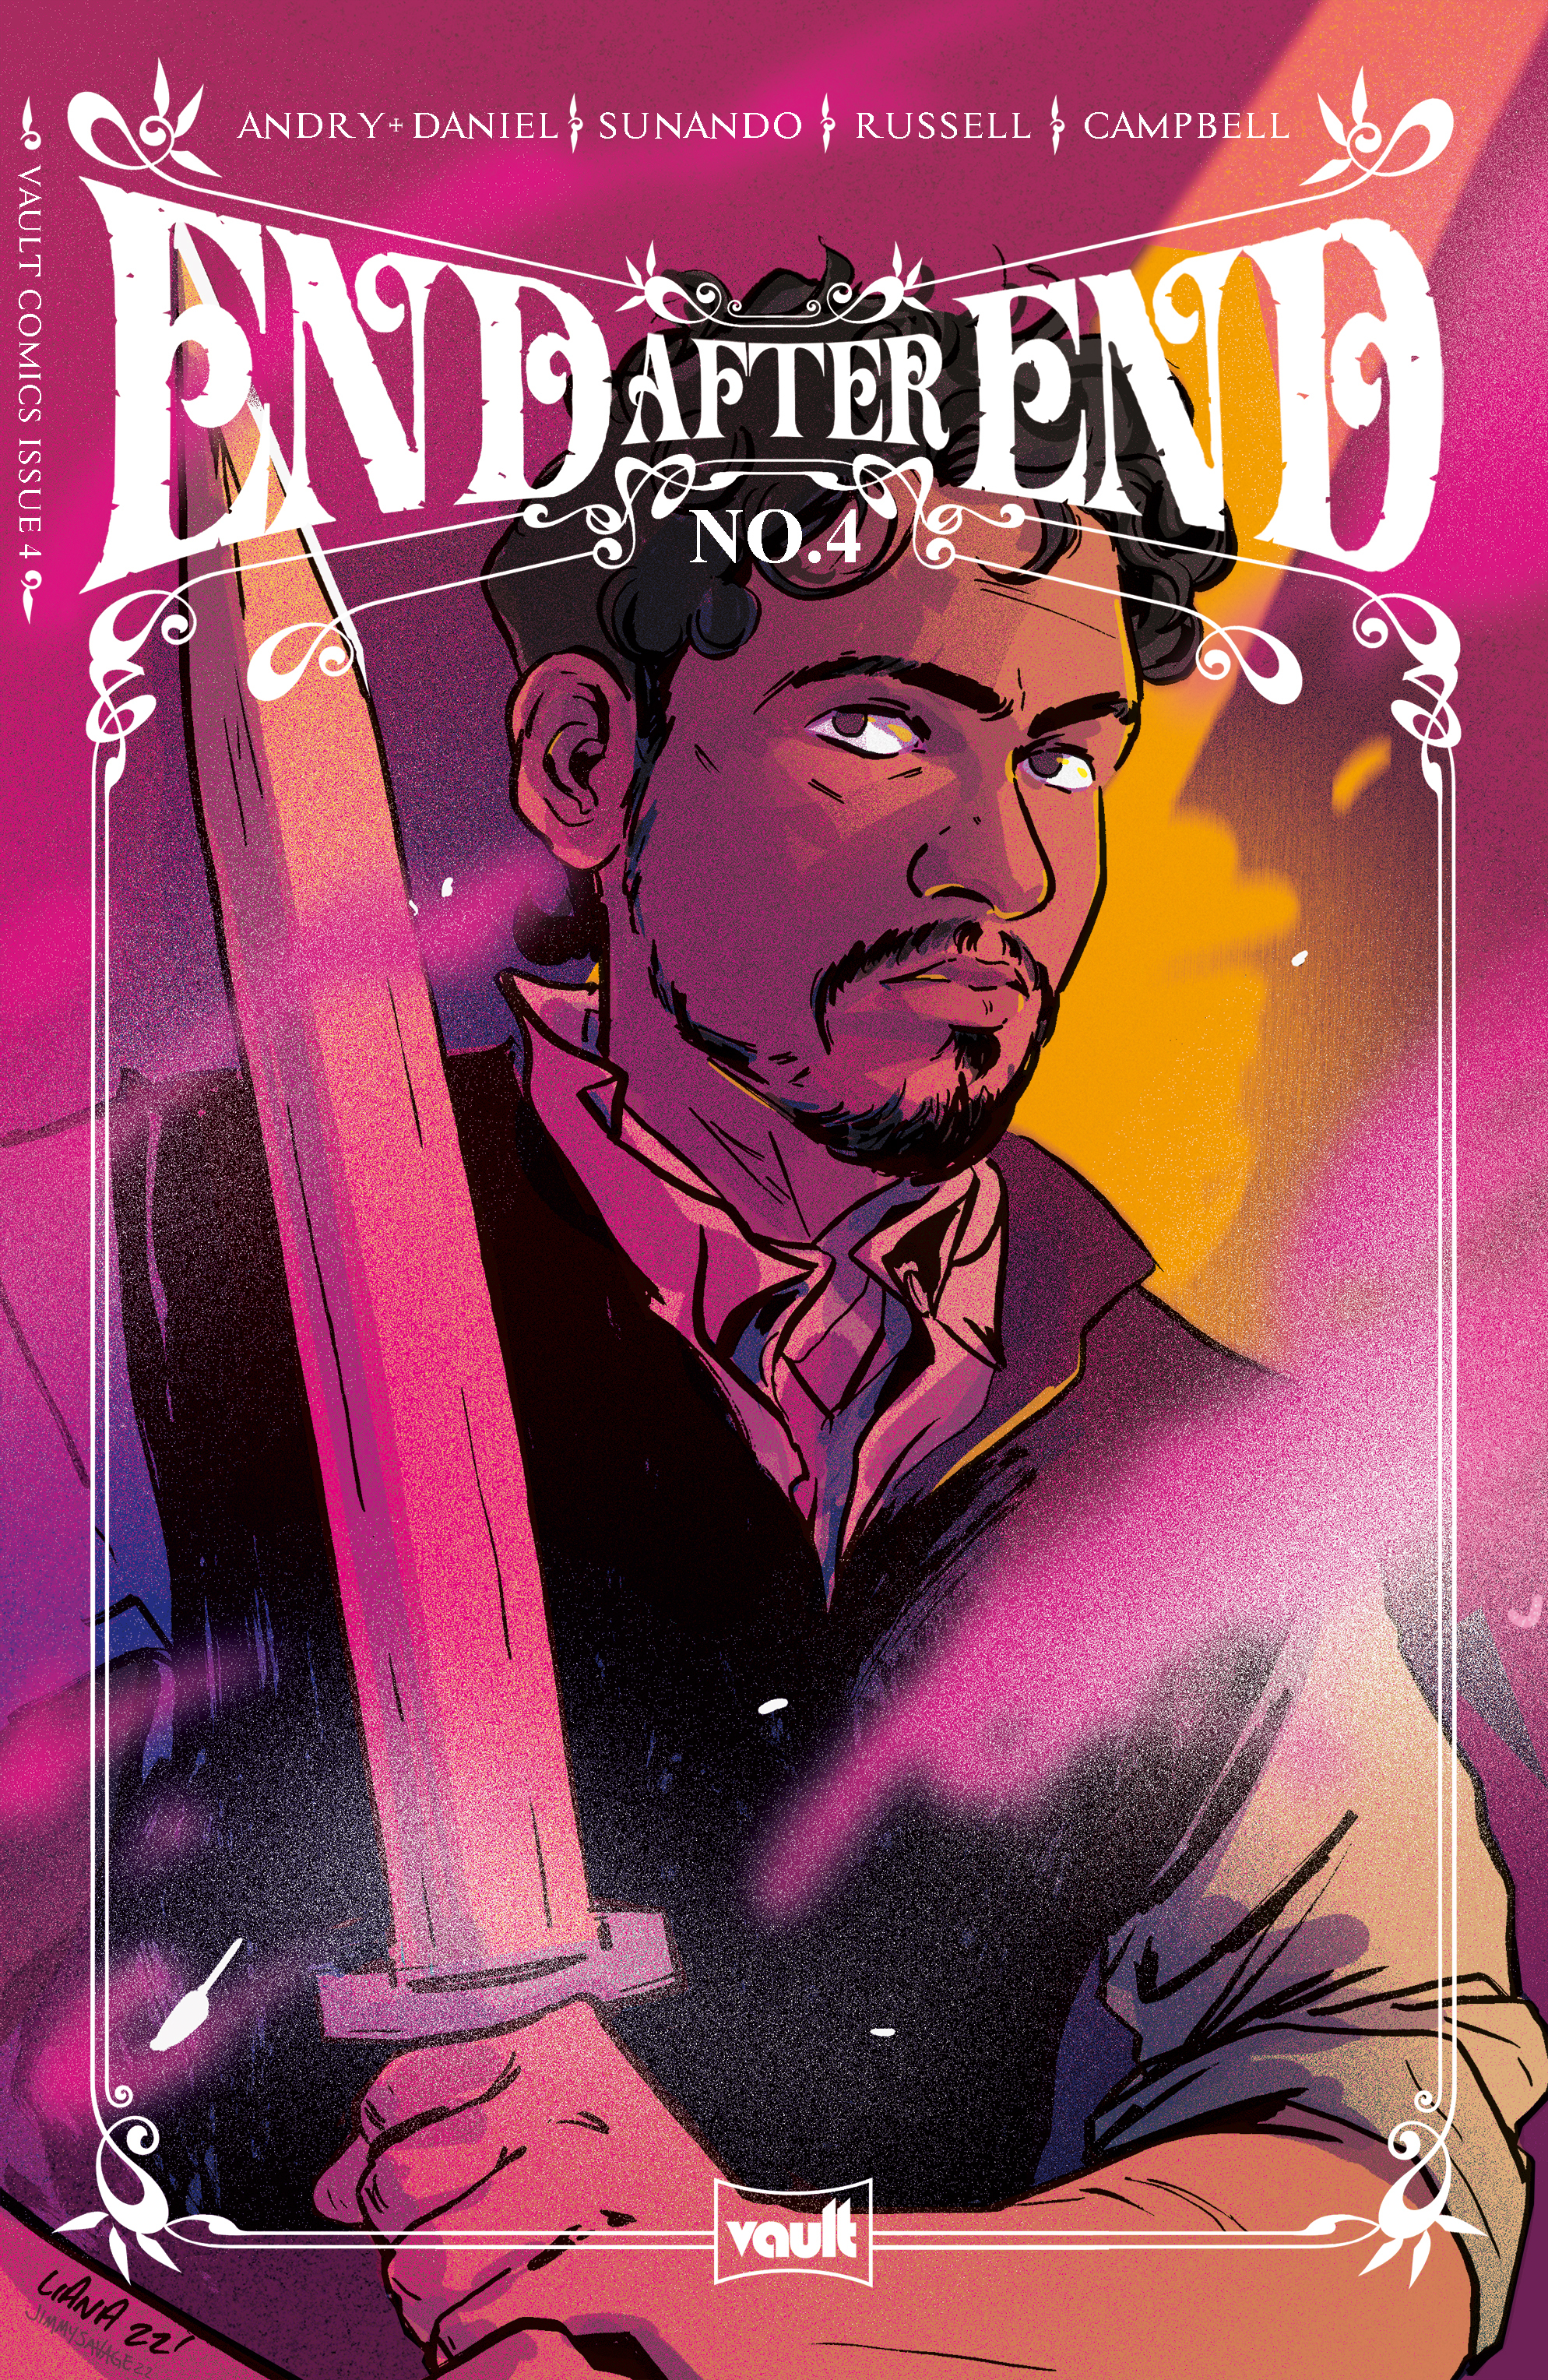 End After End #4 Cover B Kangas